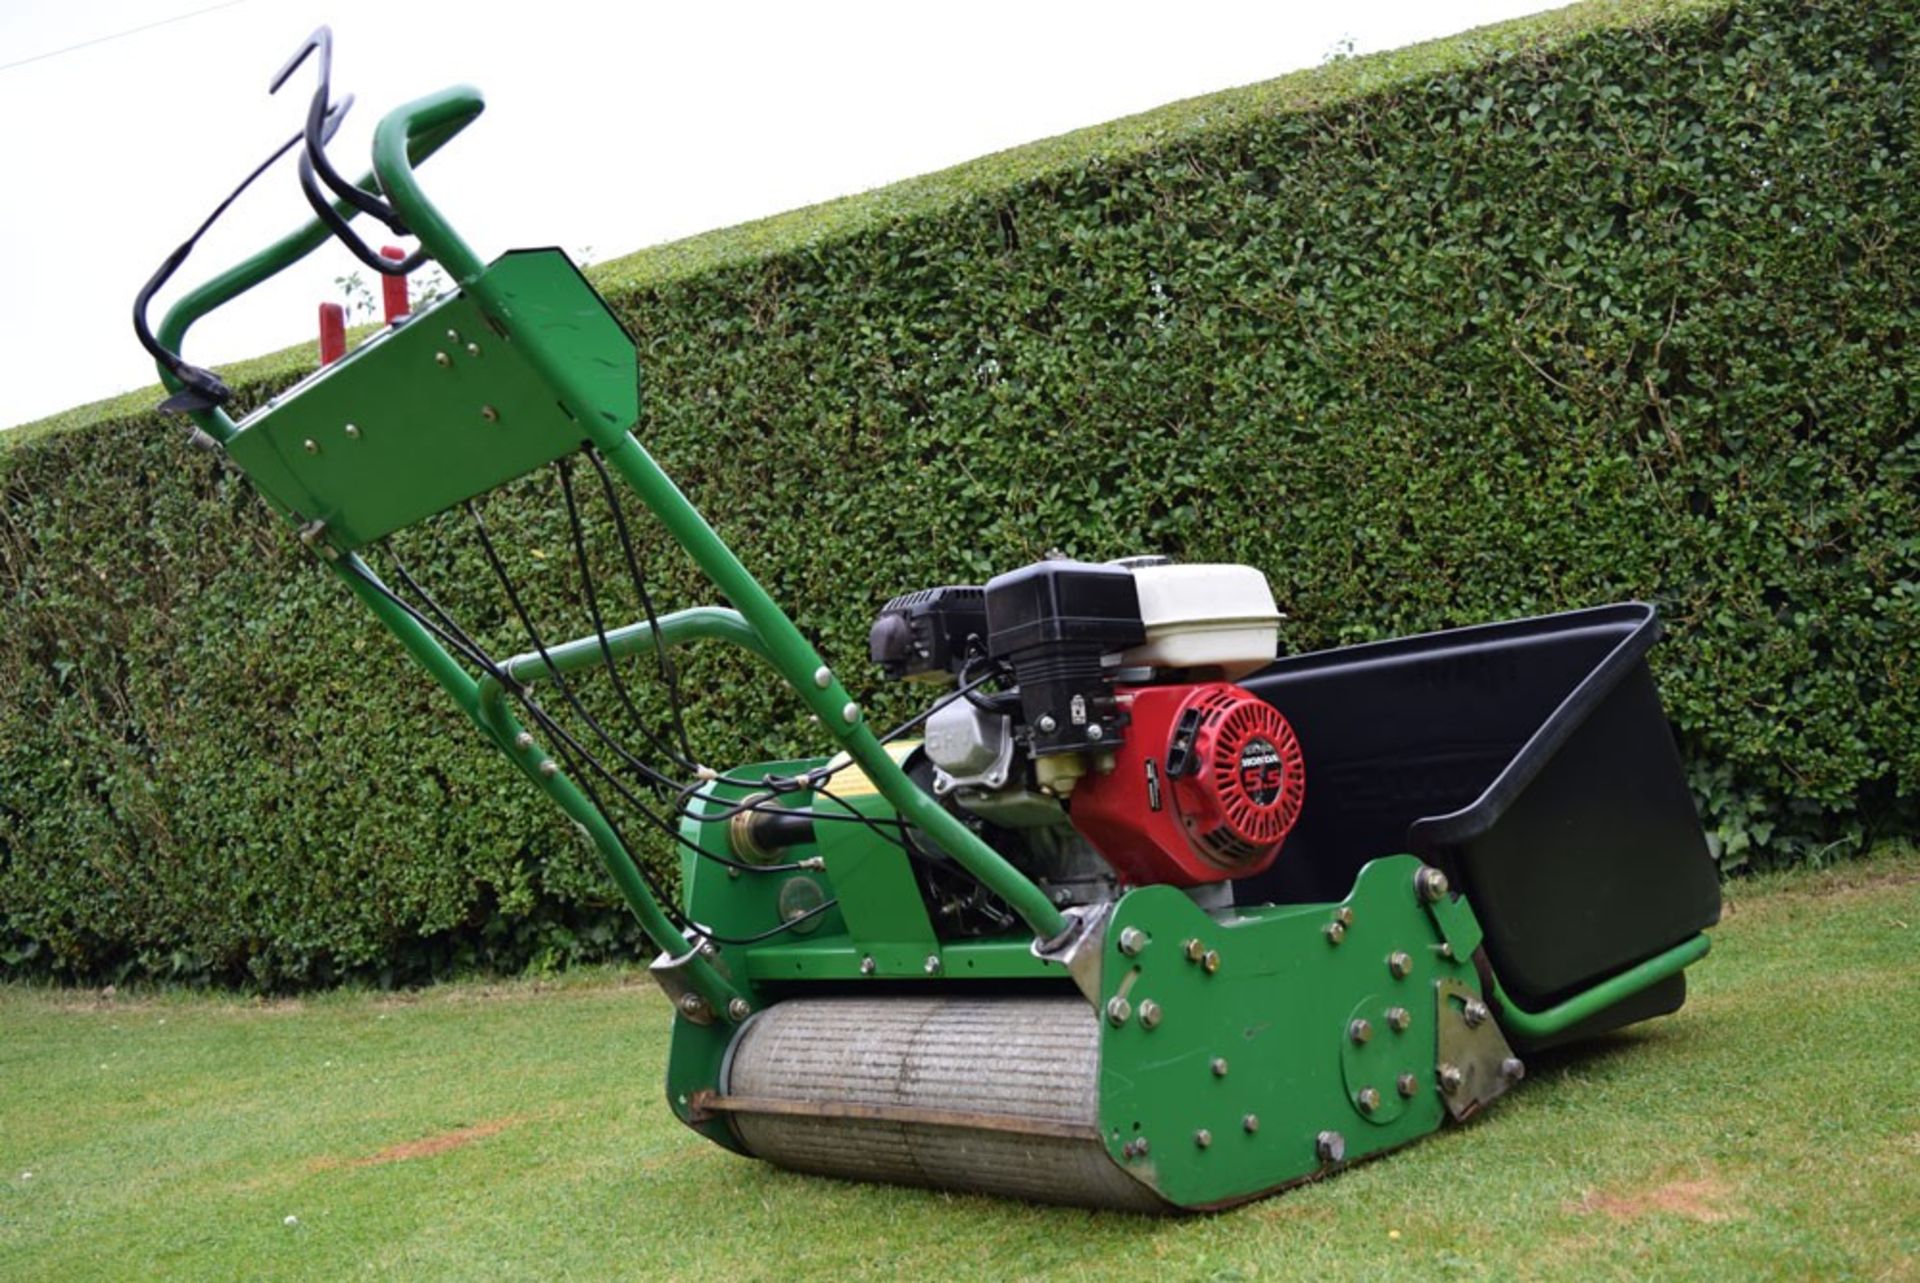 2004 Dennis G560 5 Blade Cylinder Mower With Grass Box - Image 11 of 12